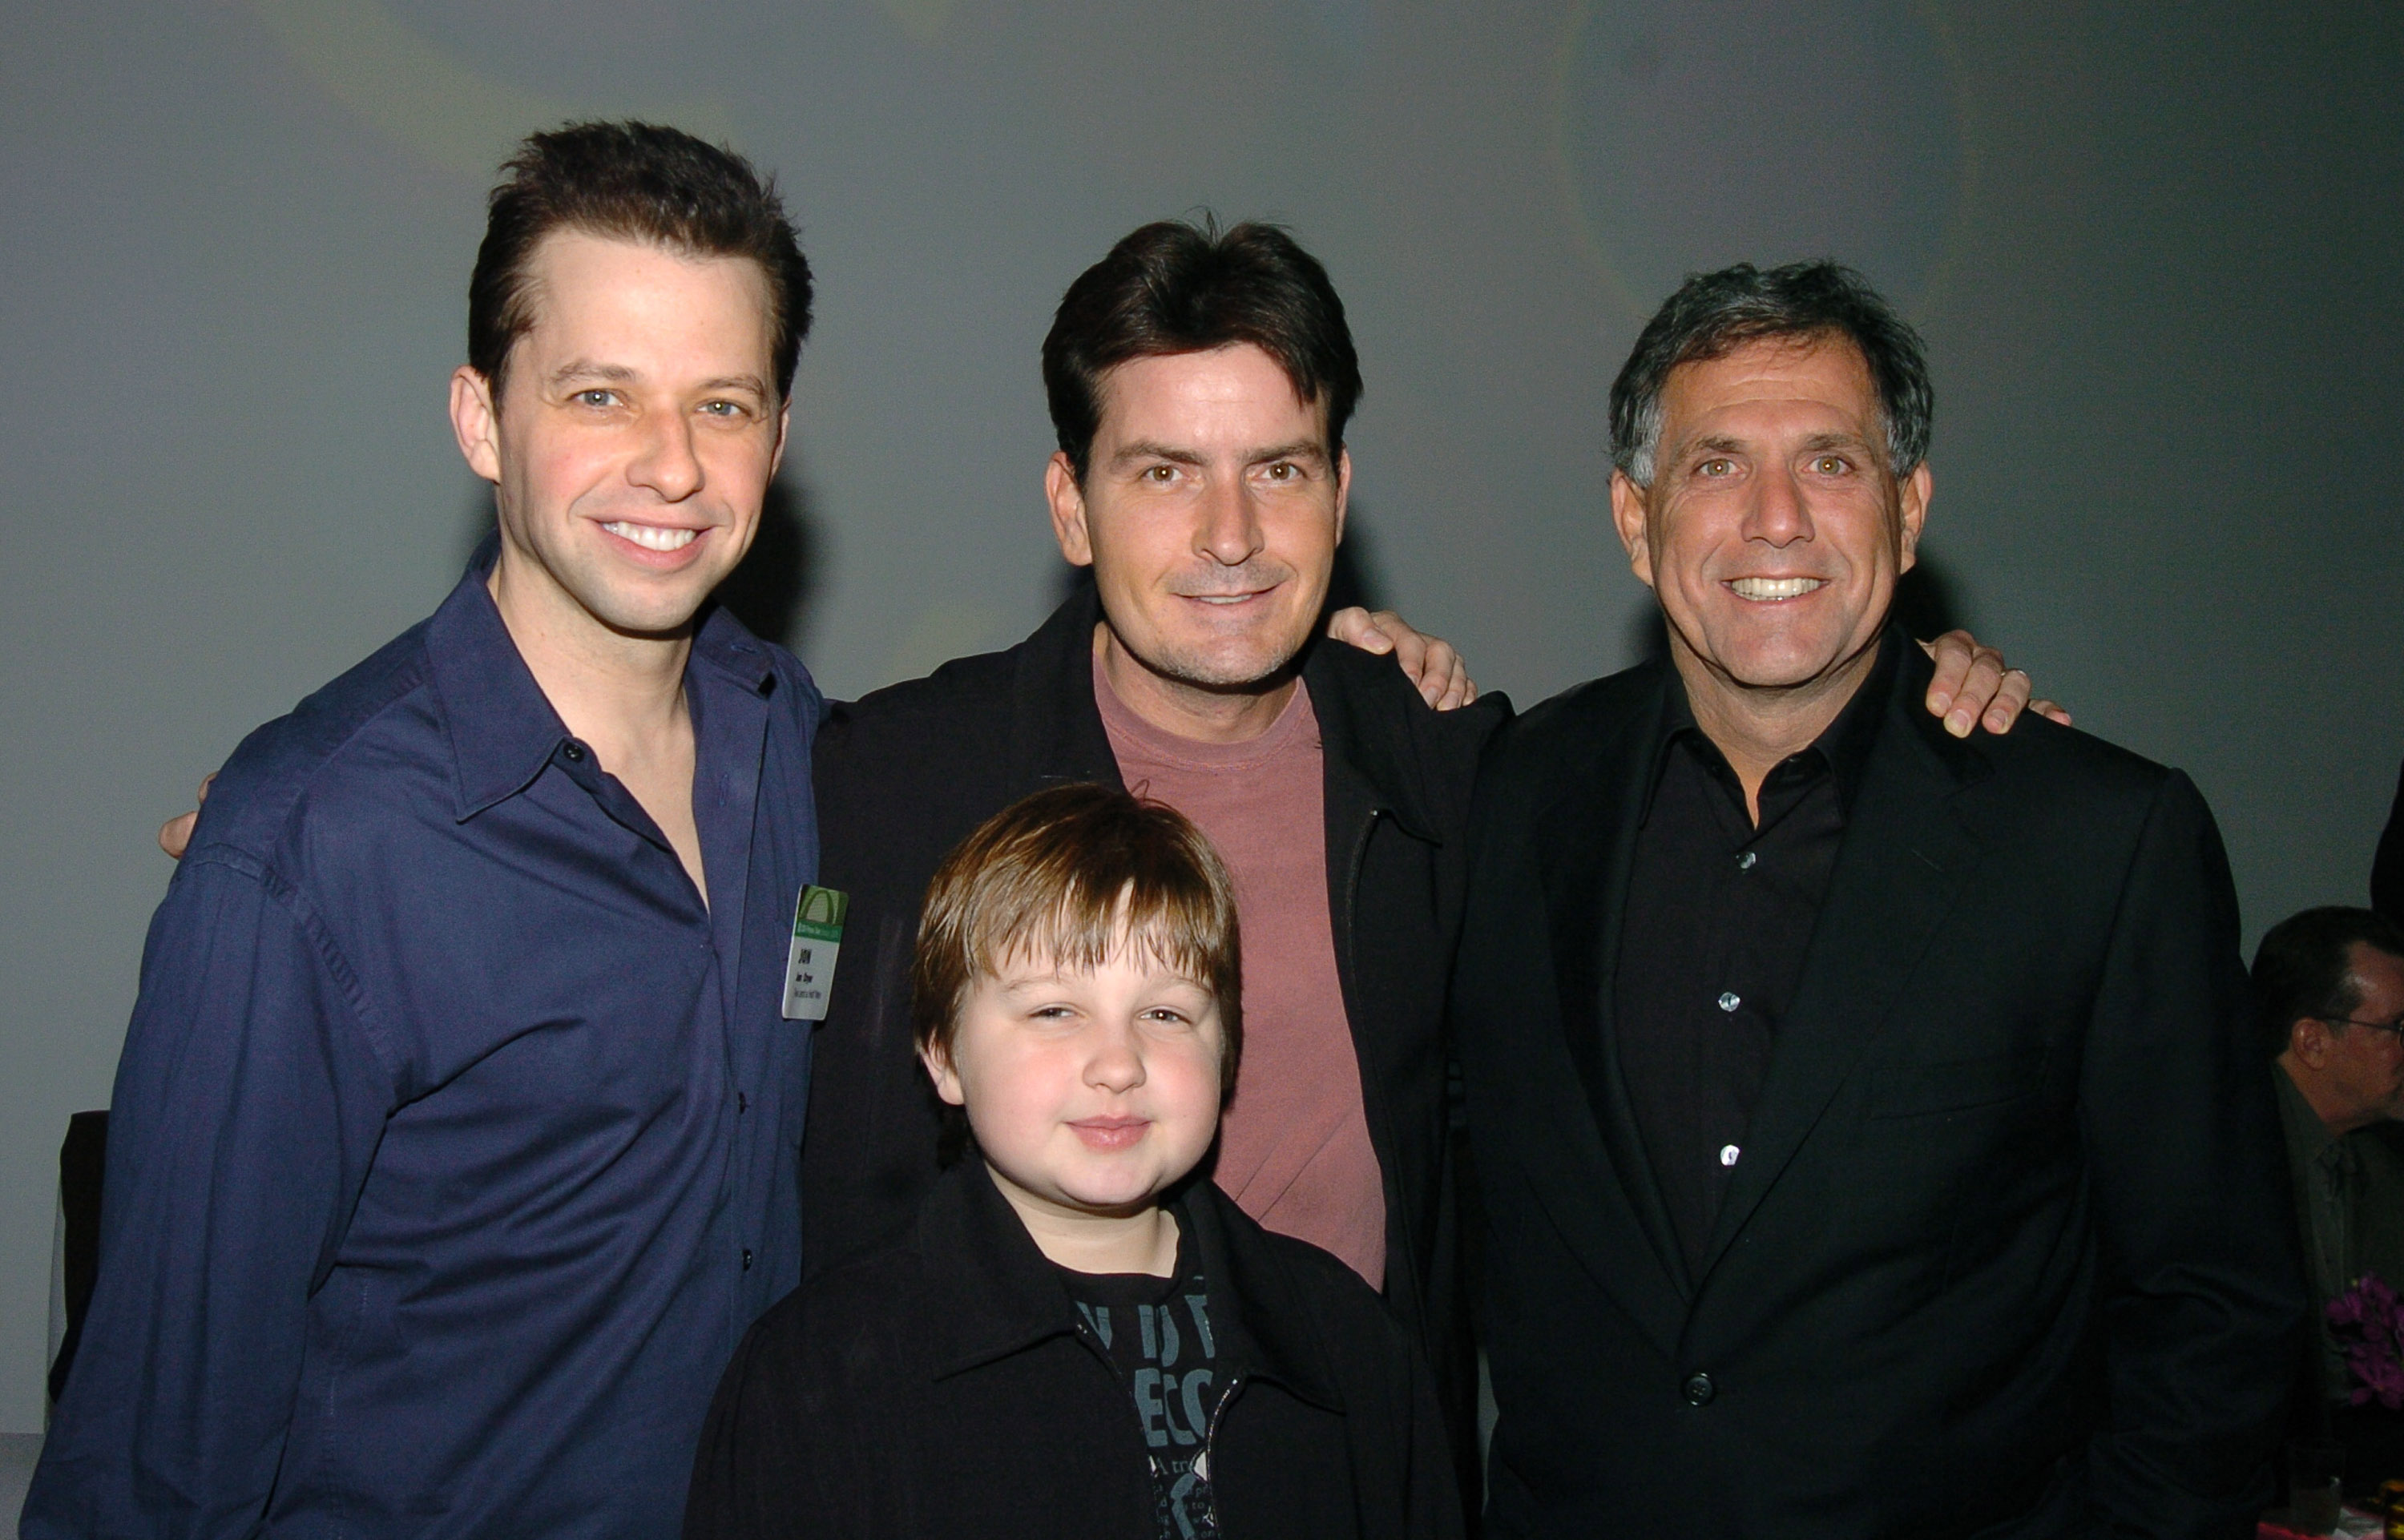 Jon Cryer, Charlie Sheen, Leslie Moonves, and Angus T. Jones in Hollywood in 2005 | Source: Getty Images